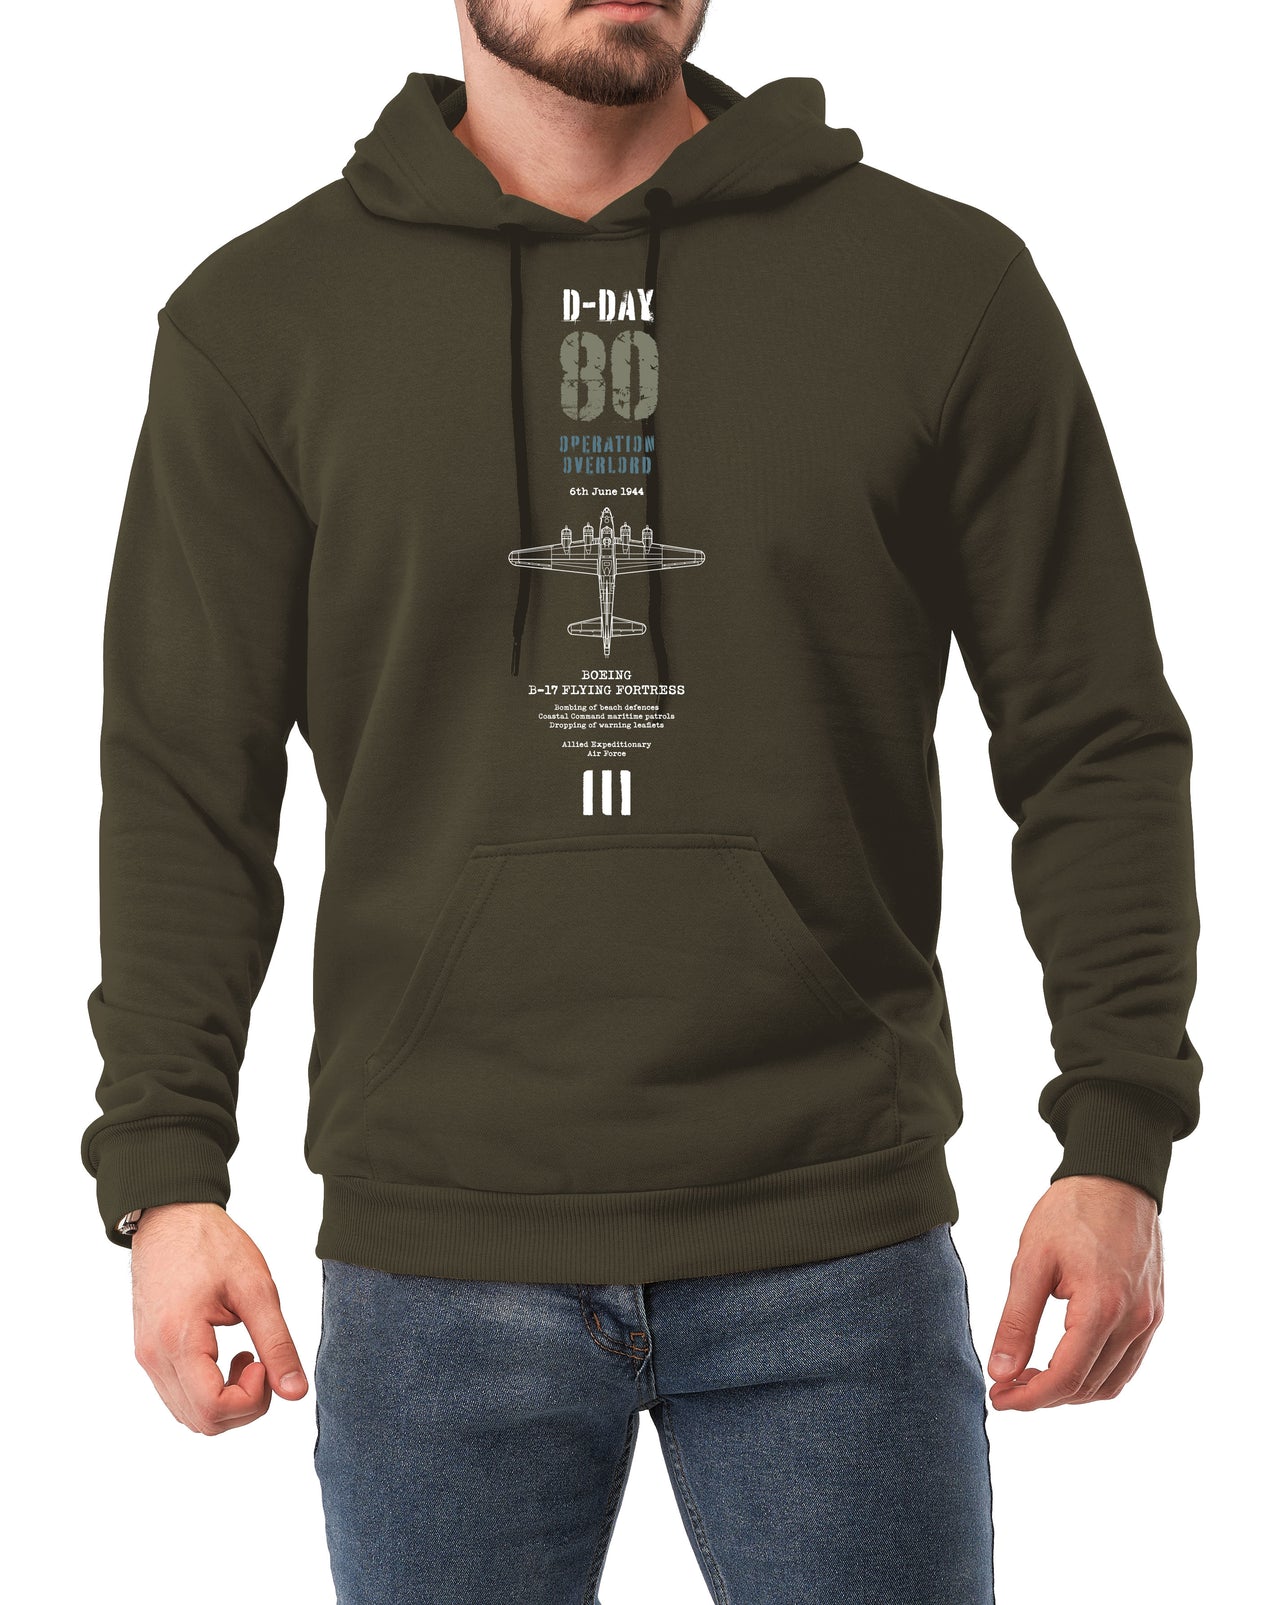 D-Day B-17 Flying Fortress - Hoodie